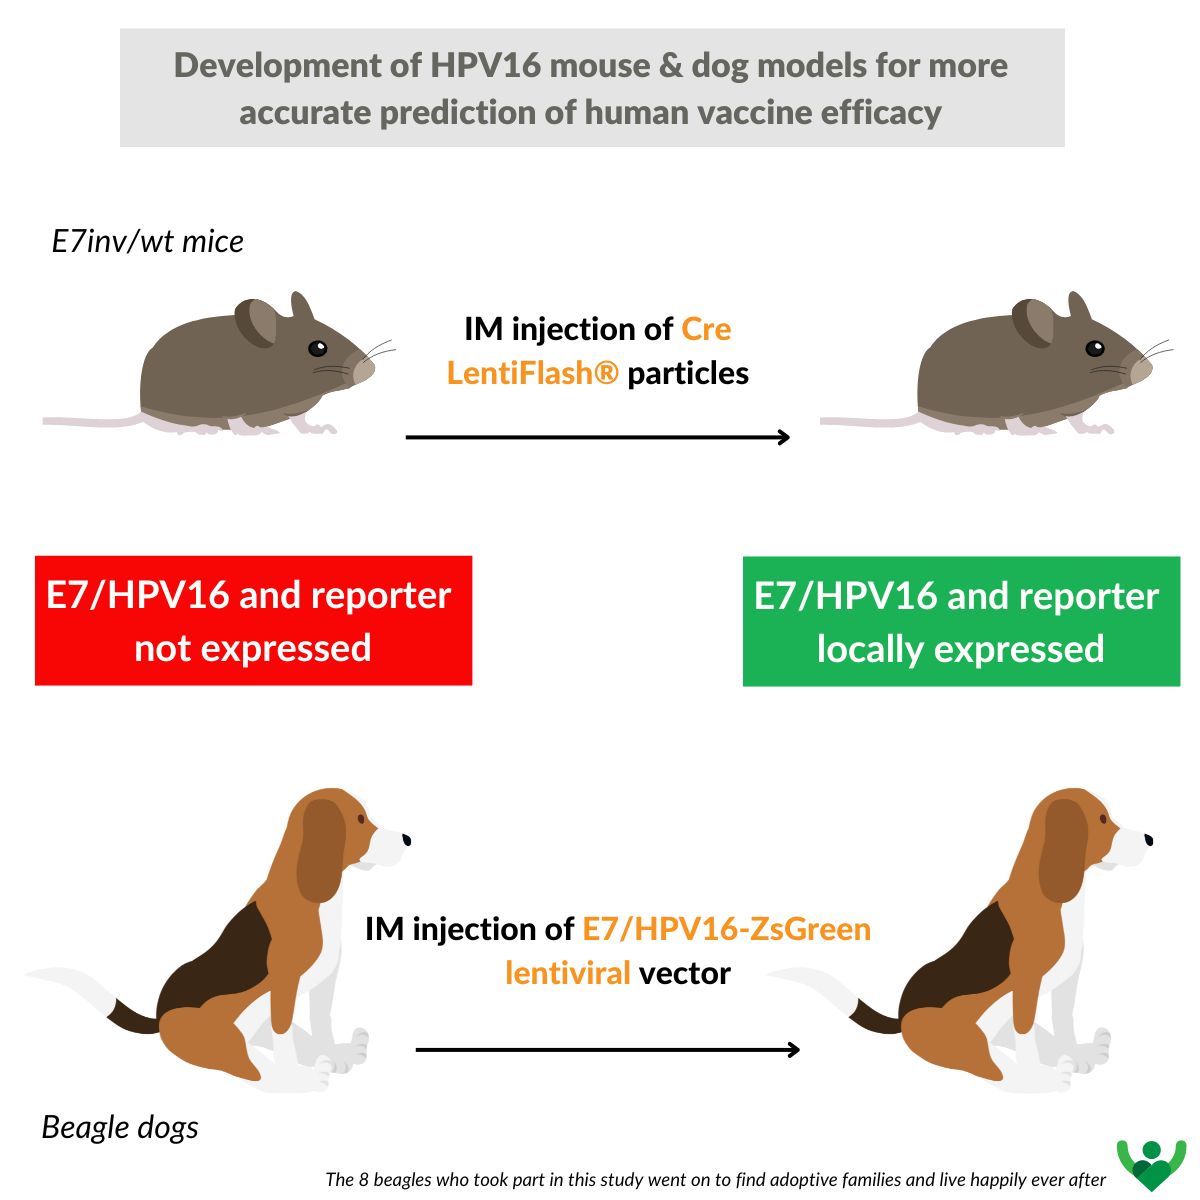 r445_9_sp-hpv16-mouse-and-dog-vaccine-efficiency.jpg